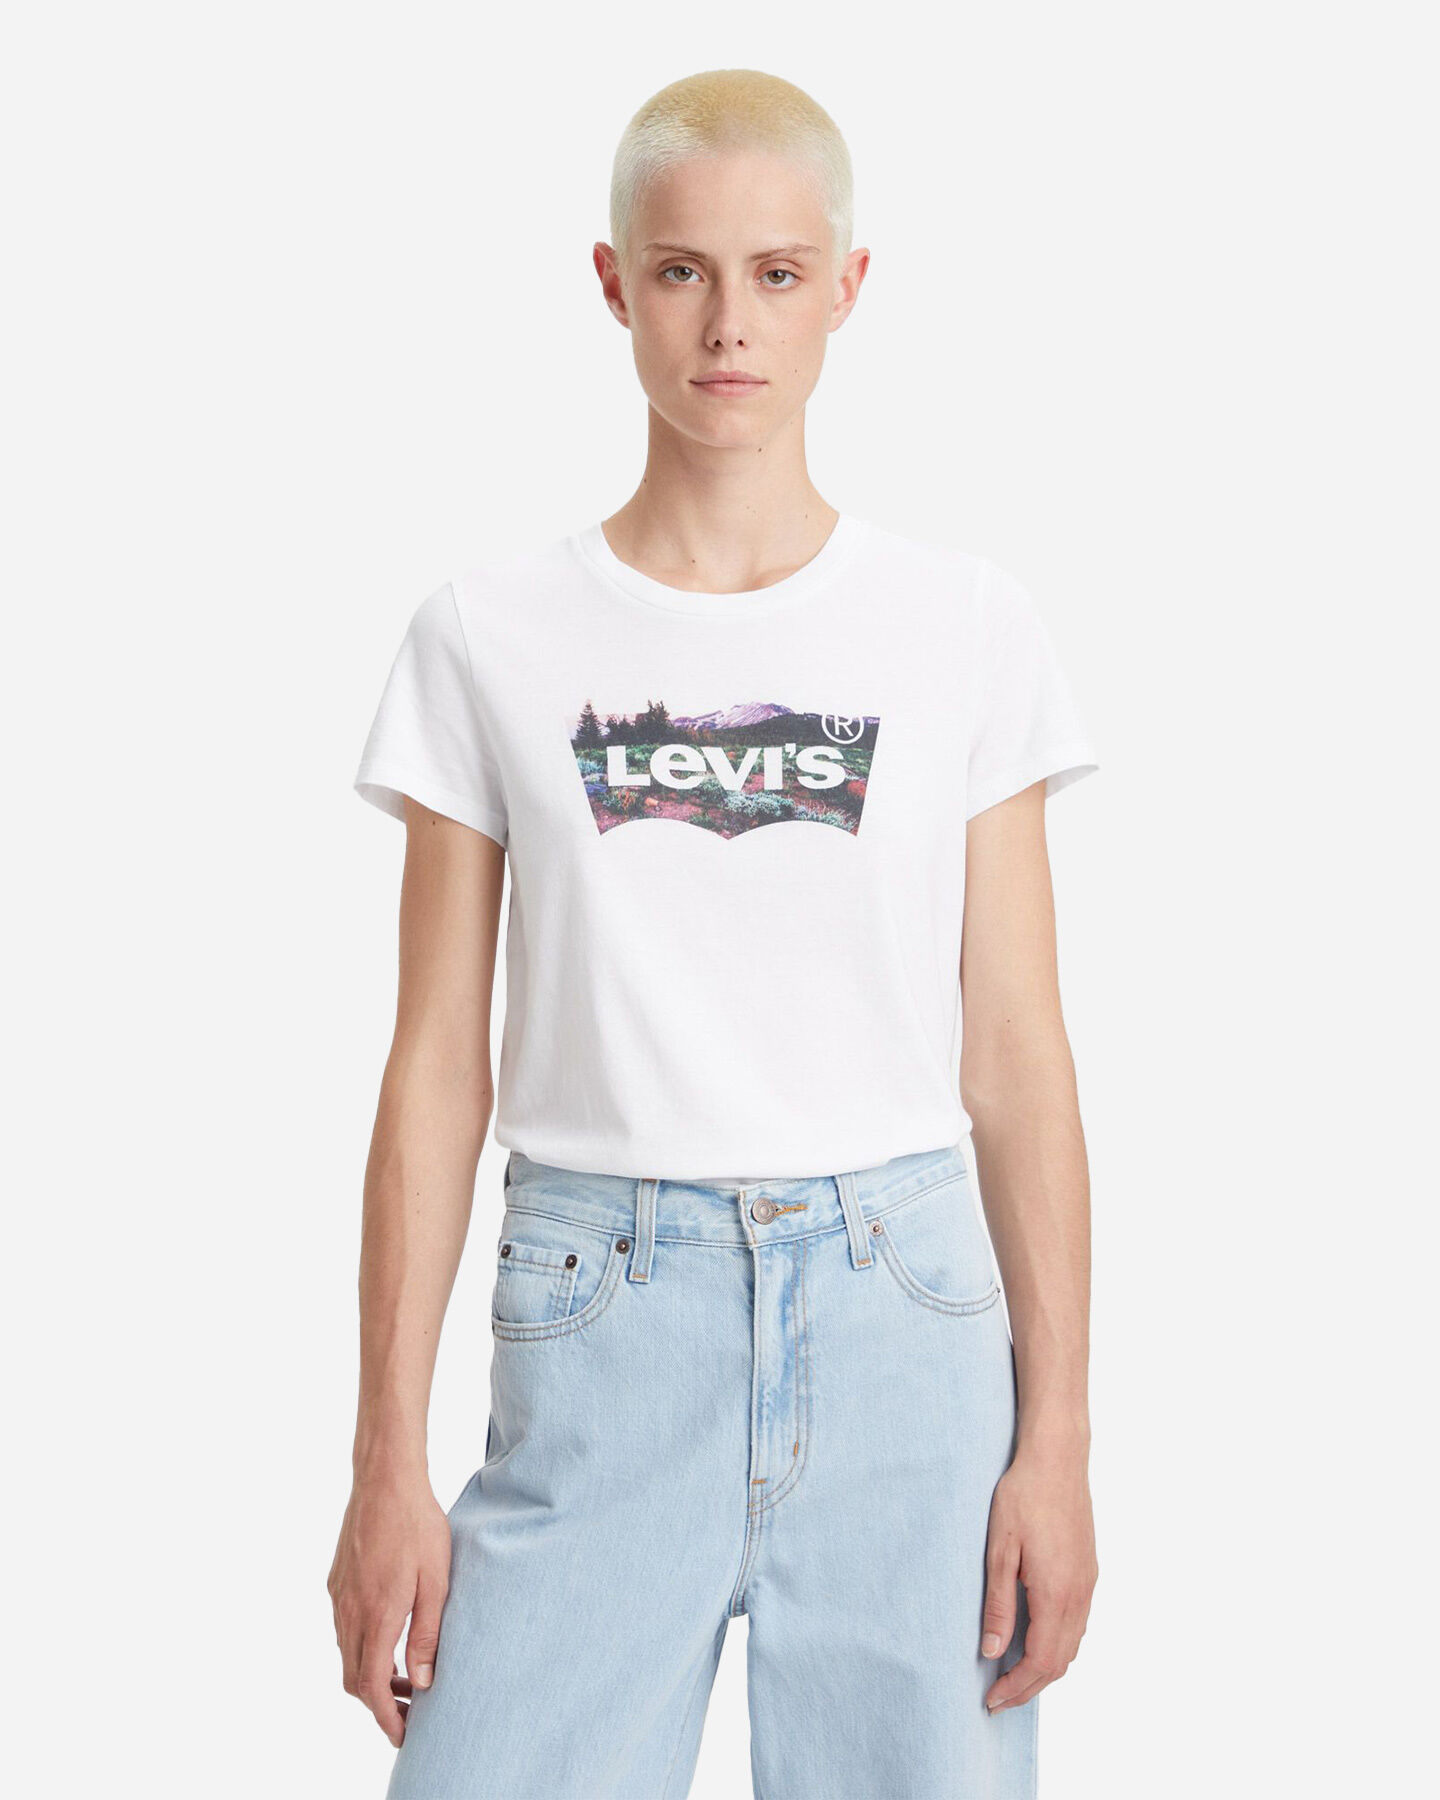  T-Shirt LEVI'S LOGO BATWING W S4112869|1926|L scatto 2